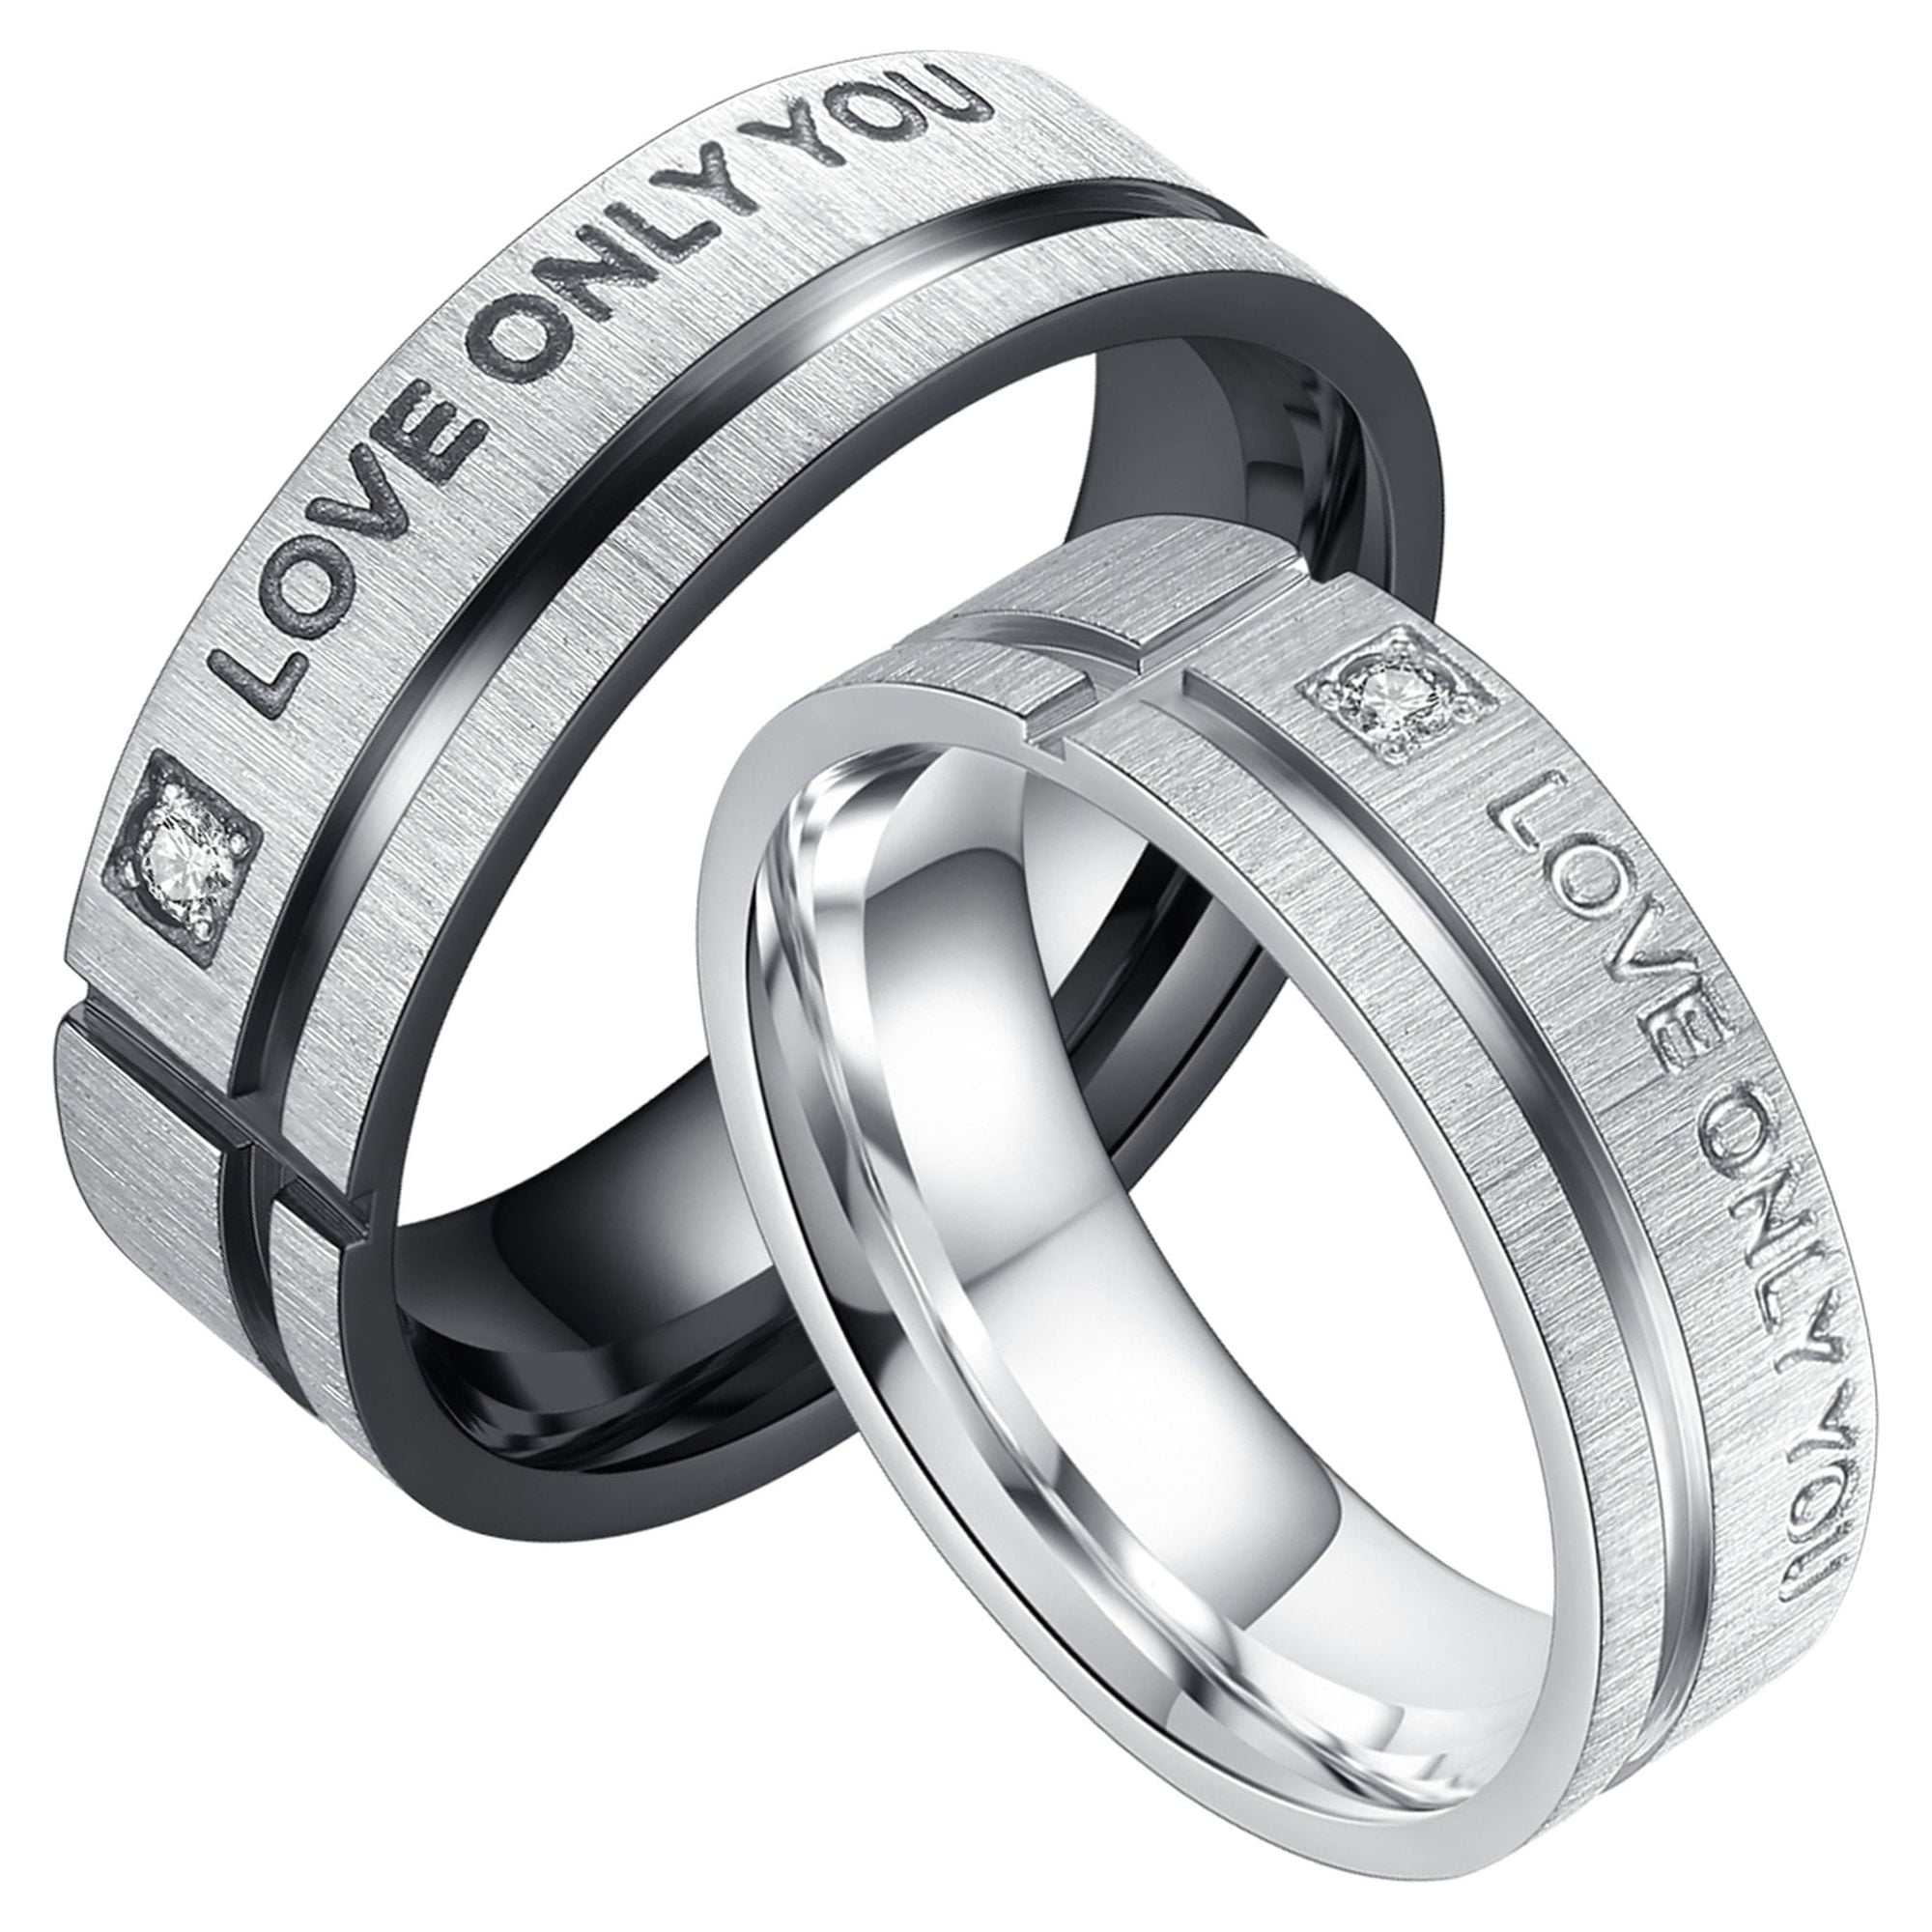 Wedding rings with diamond. Matching wedding bands. Couple rings. #wedding  #wedding… | Wedding rings sets his and hers, Couple wedding rings, Titanium  wedding rings